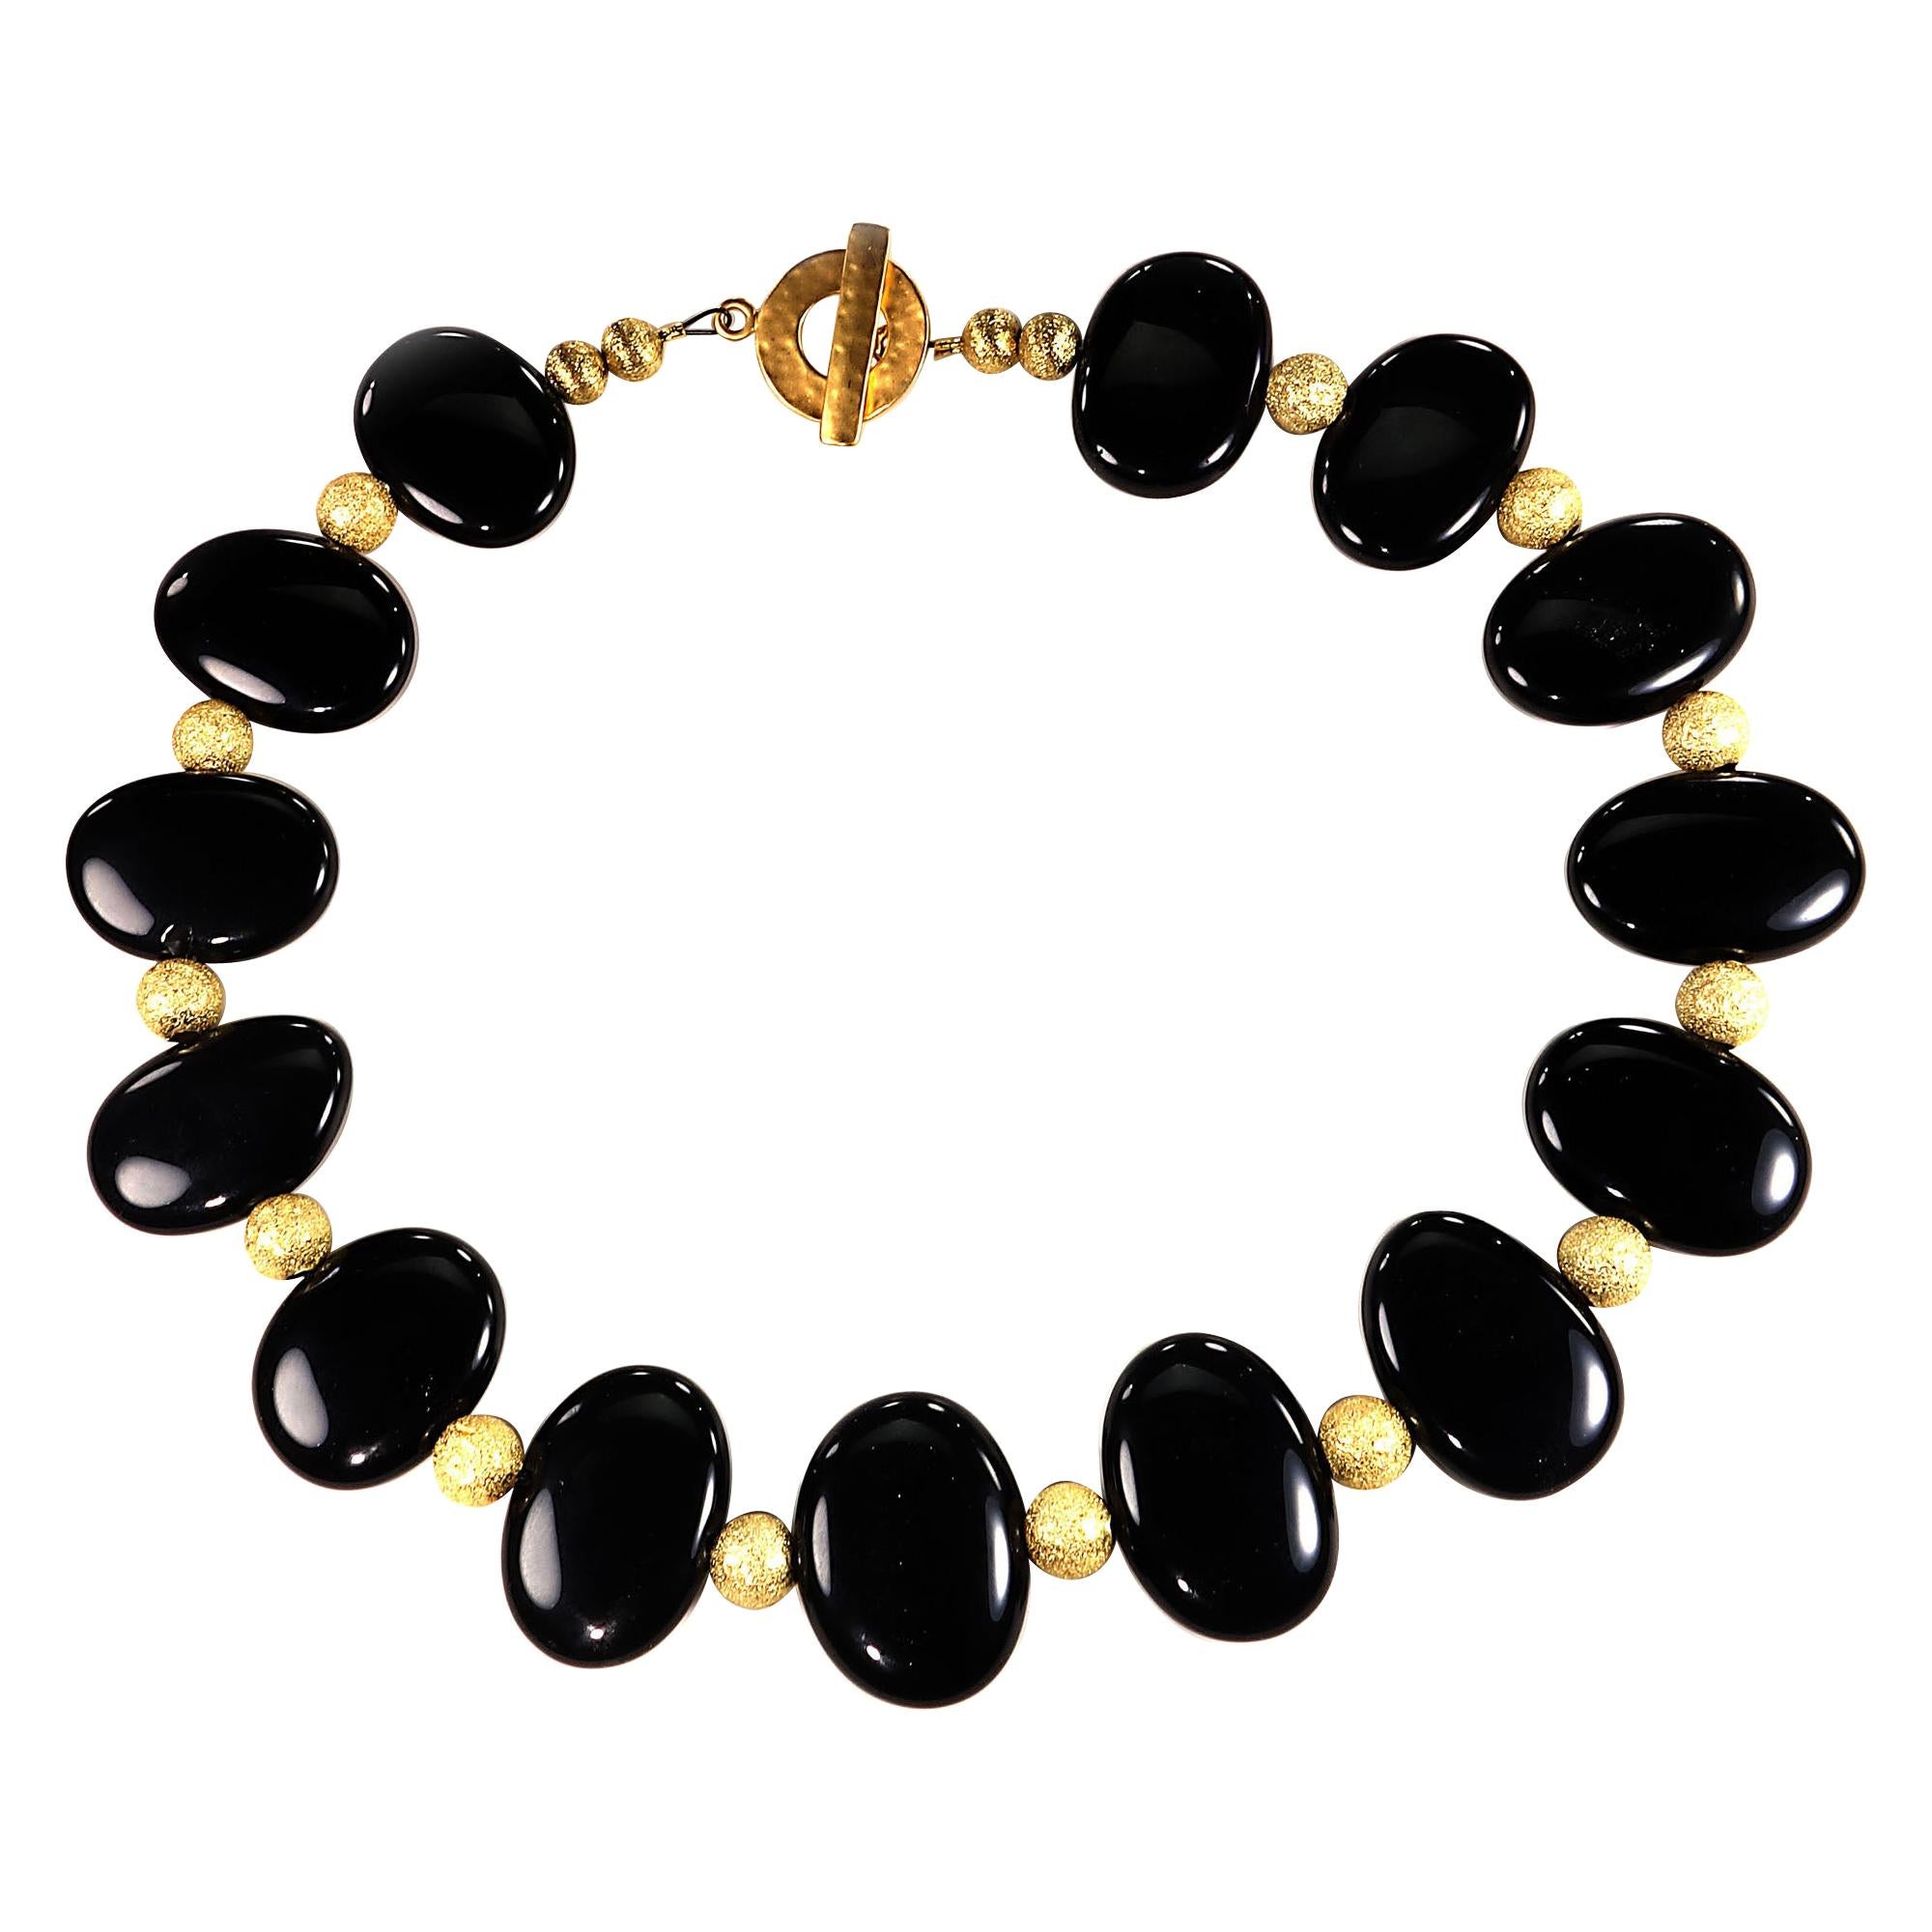 Elegant Choker Necklace of Black Onyx with Gold Accents